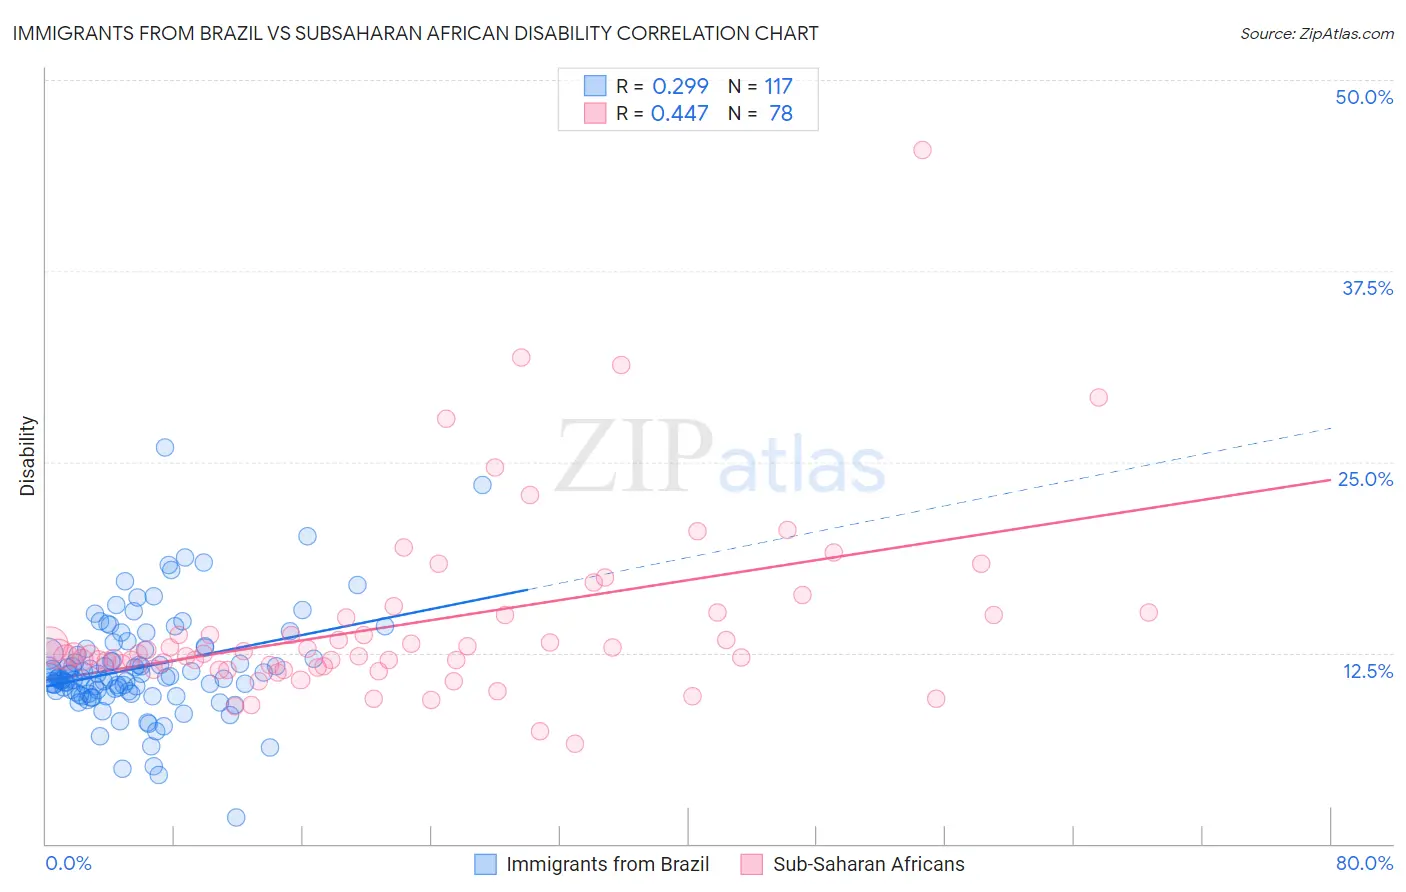 Immigrants from Brazil vs Subsaharan African Disability